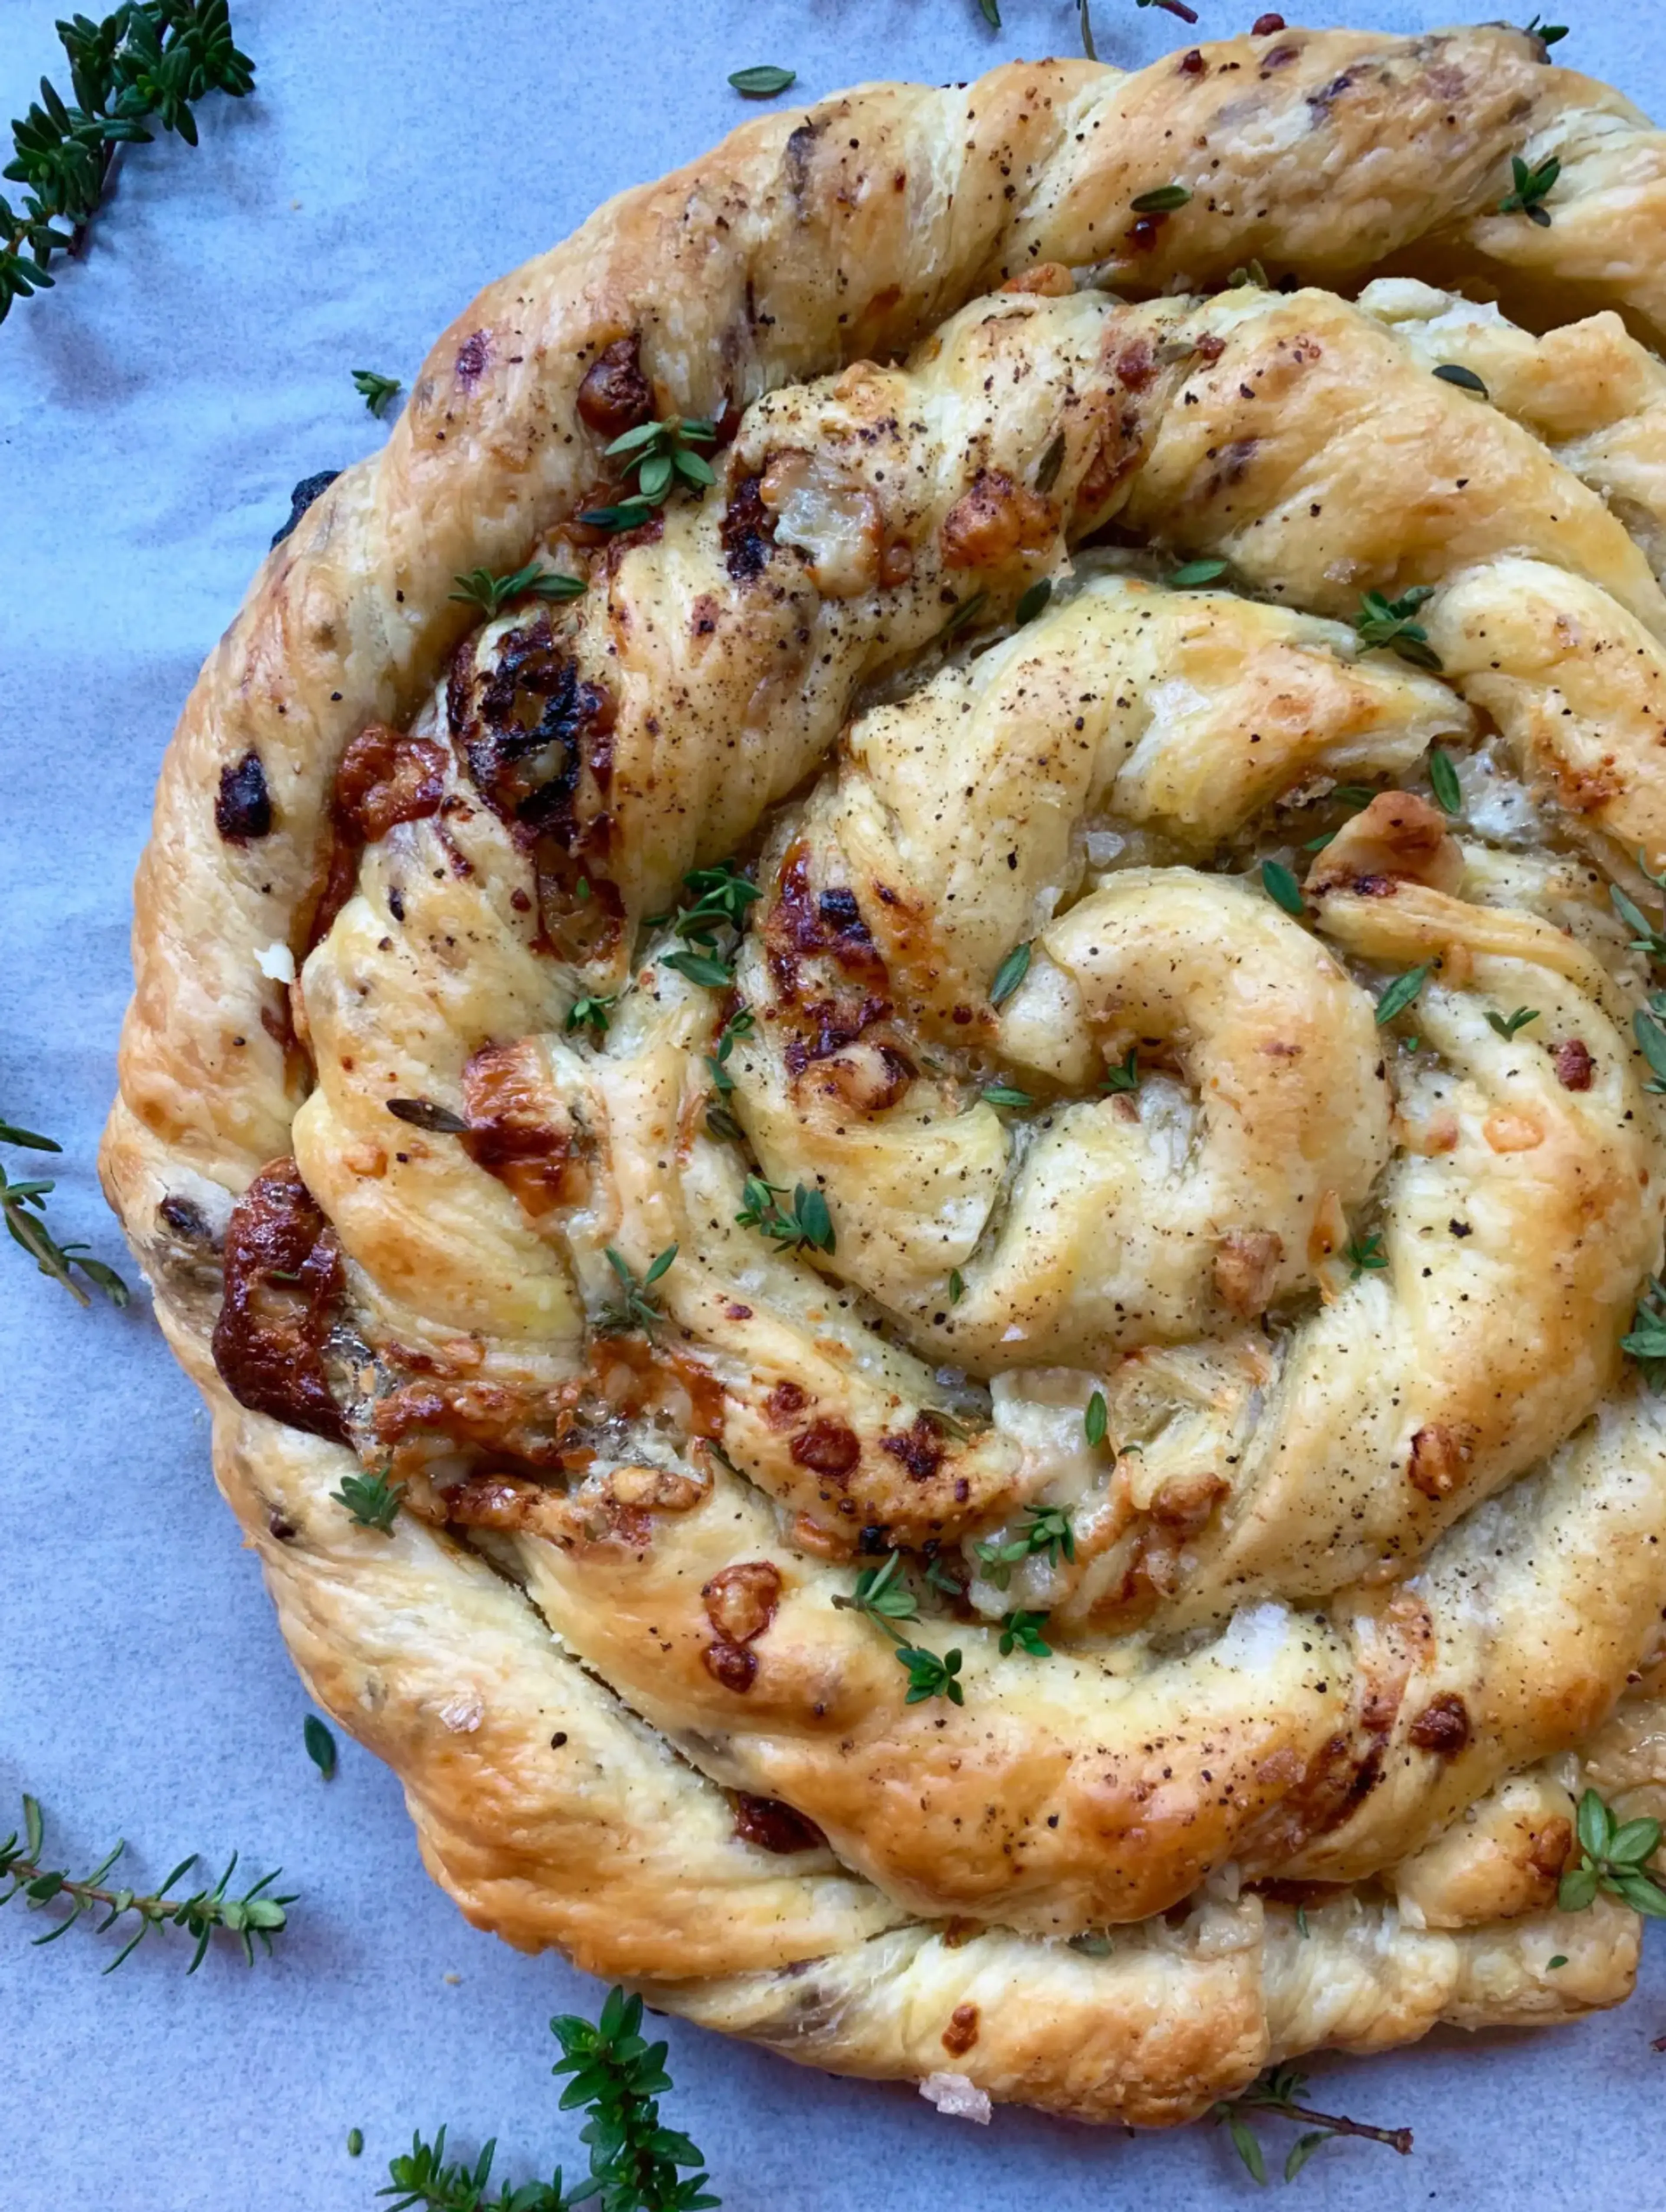 Blue Cheese, Walnut, & Thyme Pastry